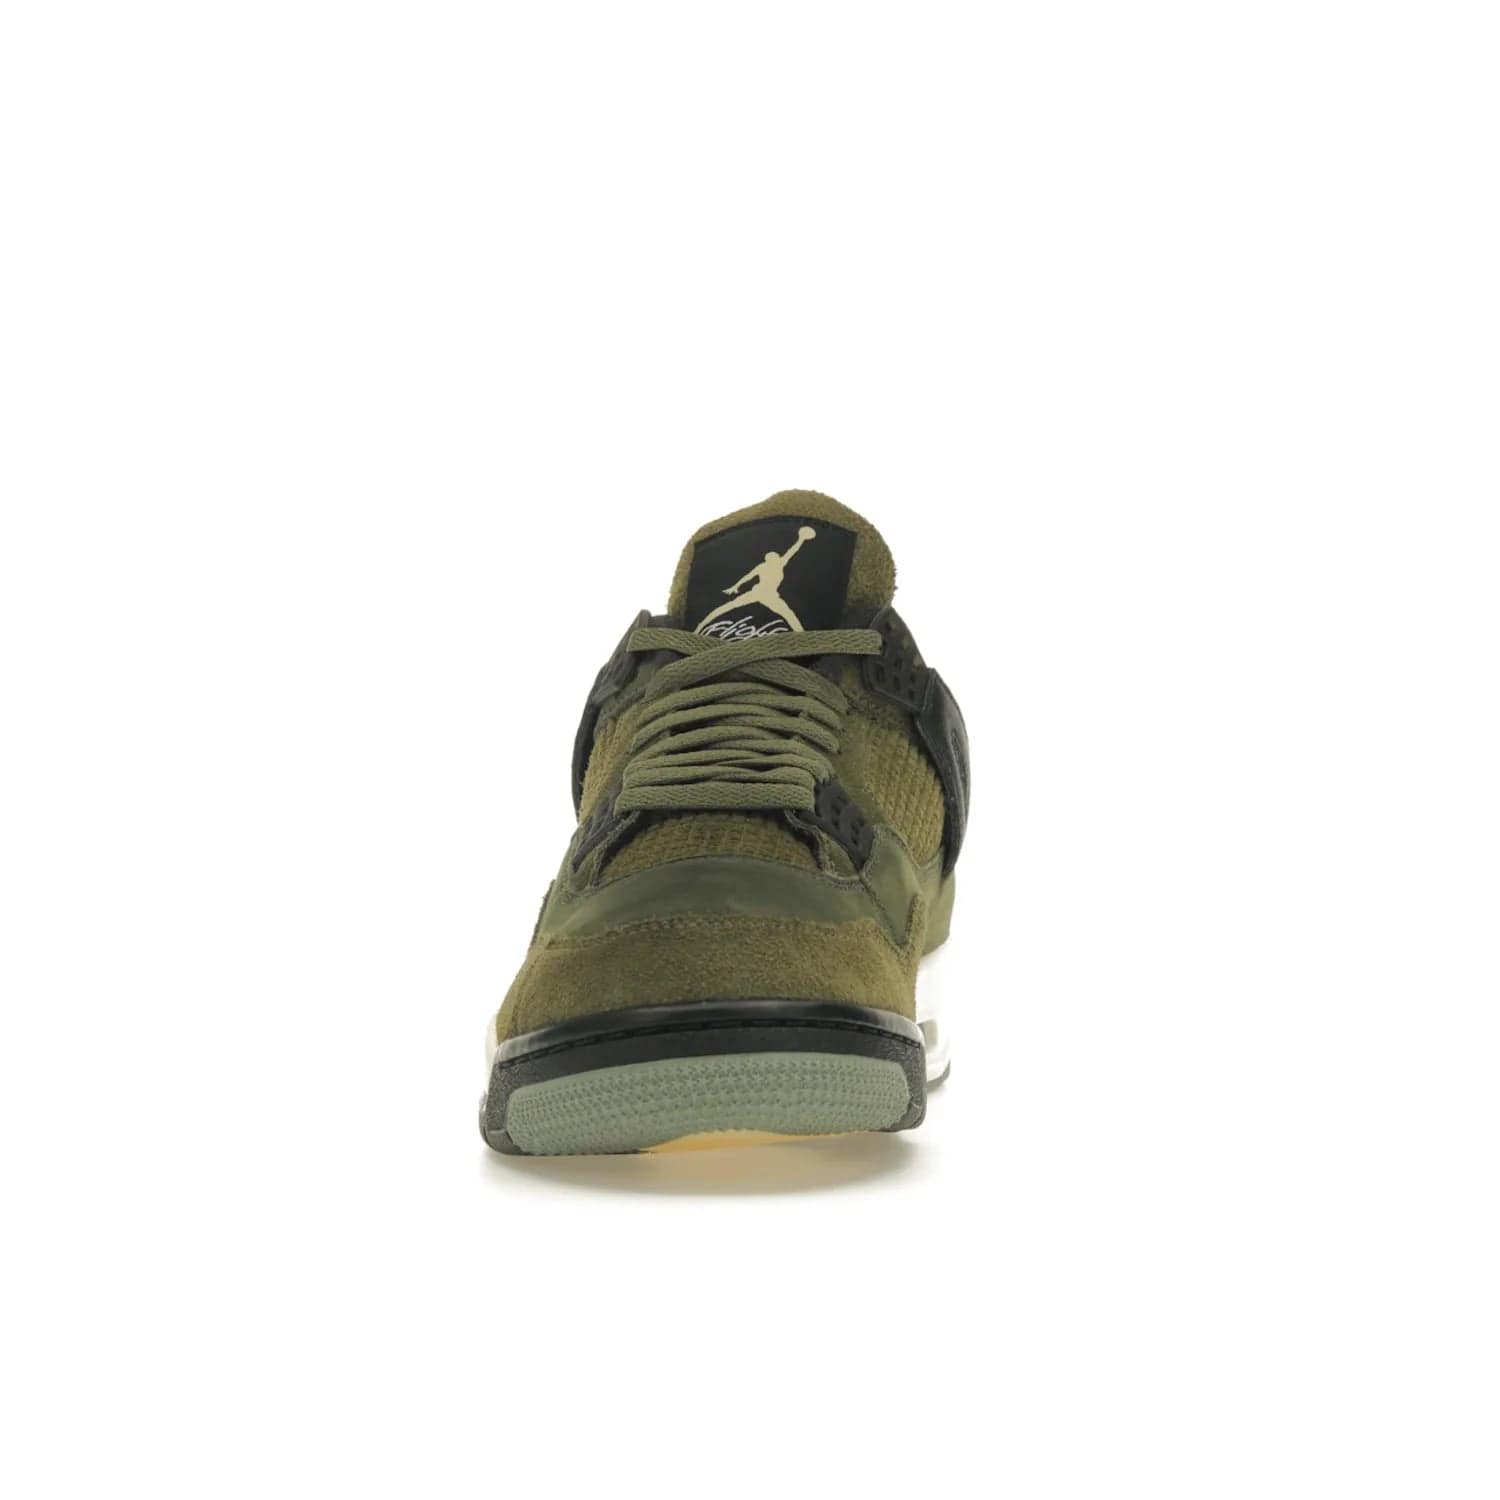 Jordan 4 Retro SE Craft Medium Olive - Image 11 - Only at www.BallersClubKickz.com - Grab the Jordan 4 Retro SE Crafts for a unique style. Combines Medium Olive, Pale Vanilla, Khaki, Black and Sail, with same classic shape, cushioning, and rubber outsole. Available on November 18th!